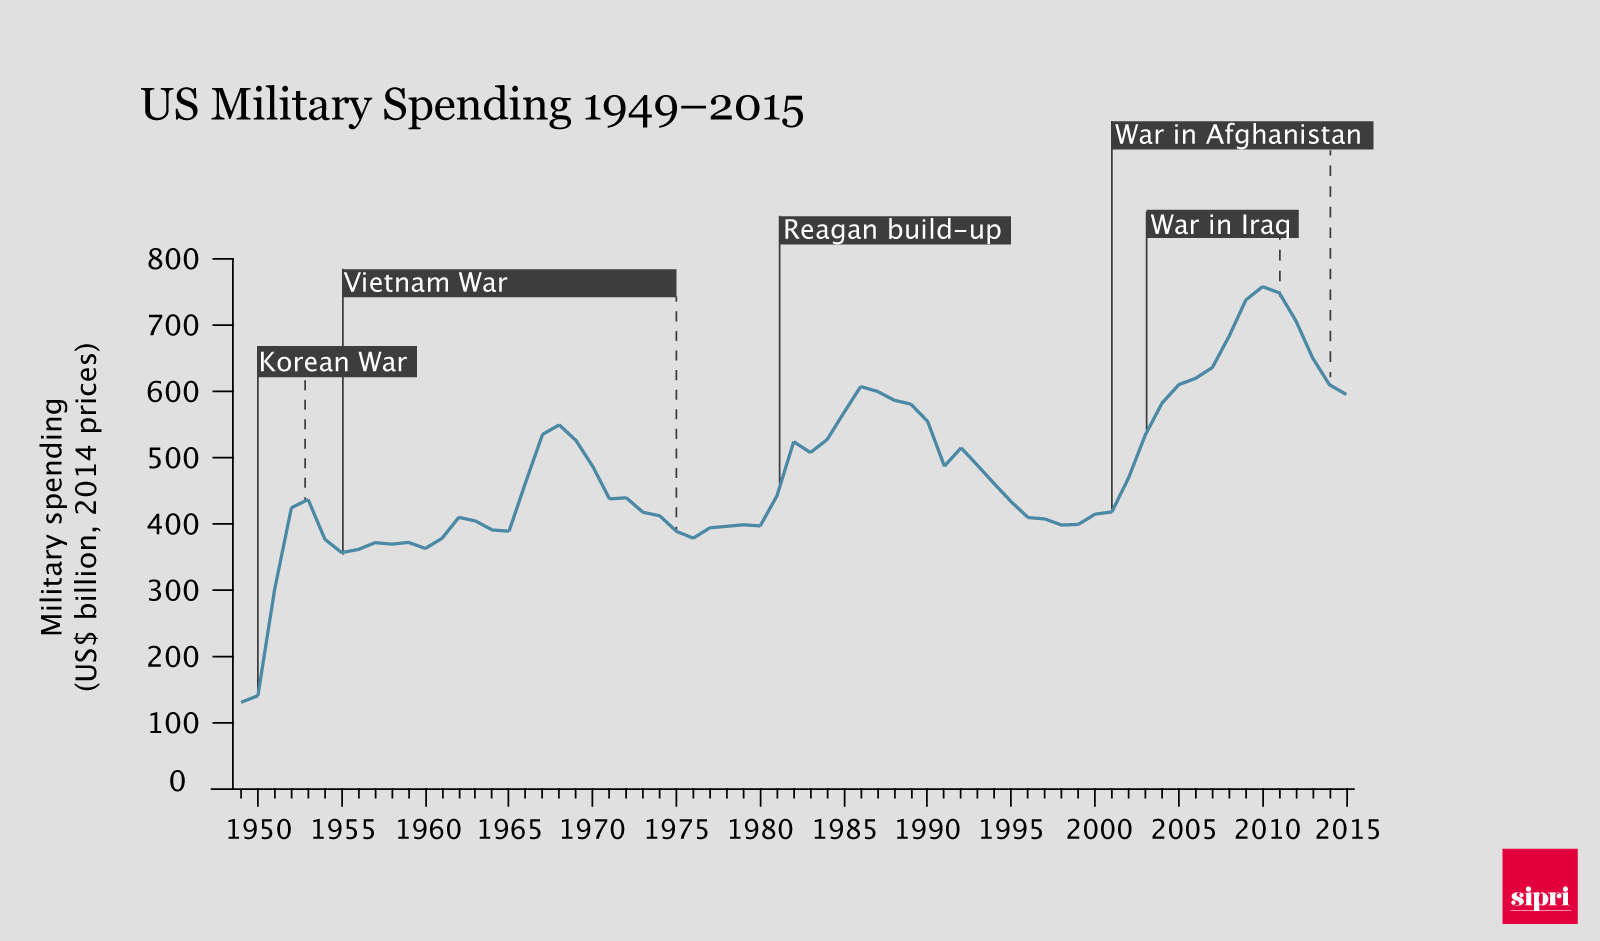 Graph of US military spending 1949-2015